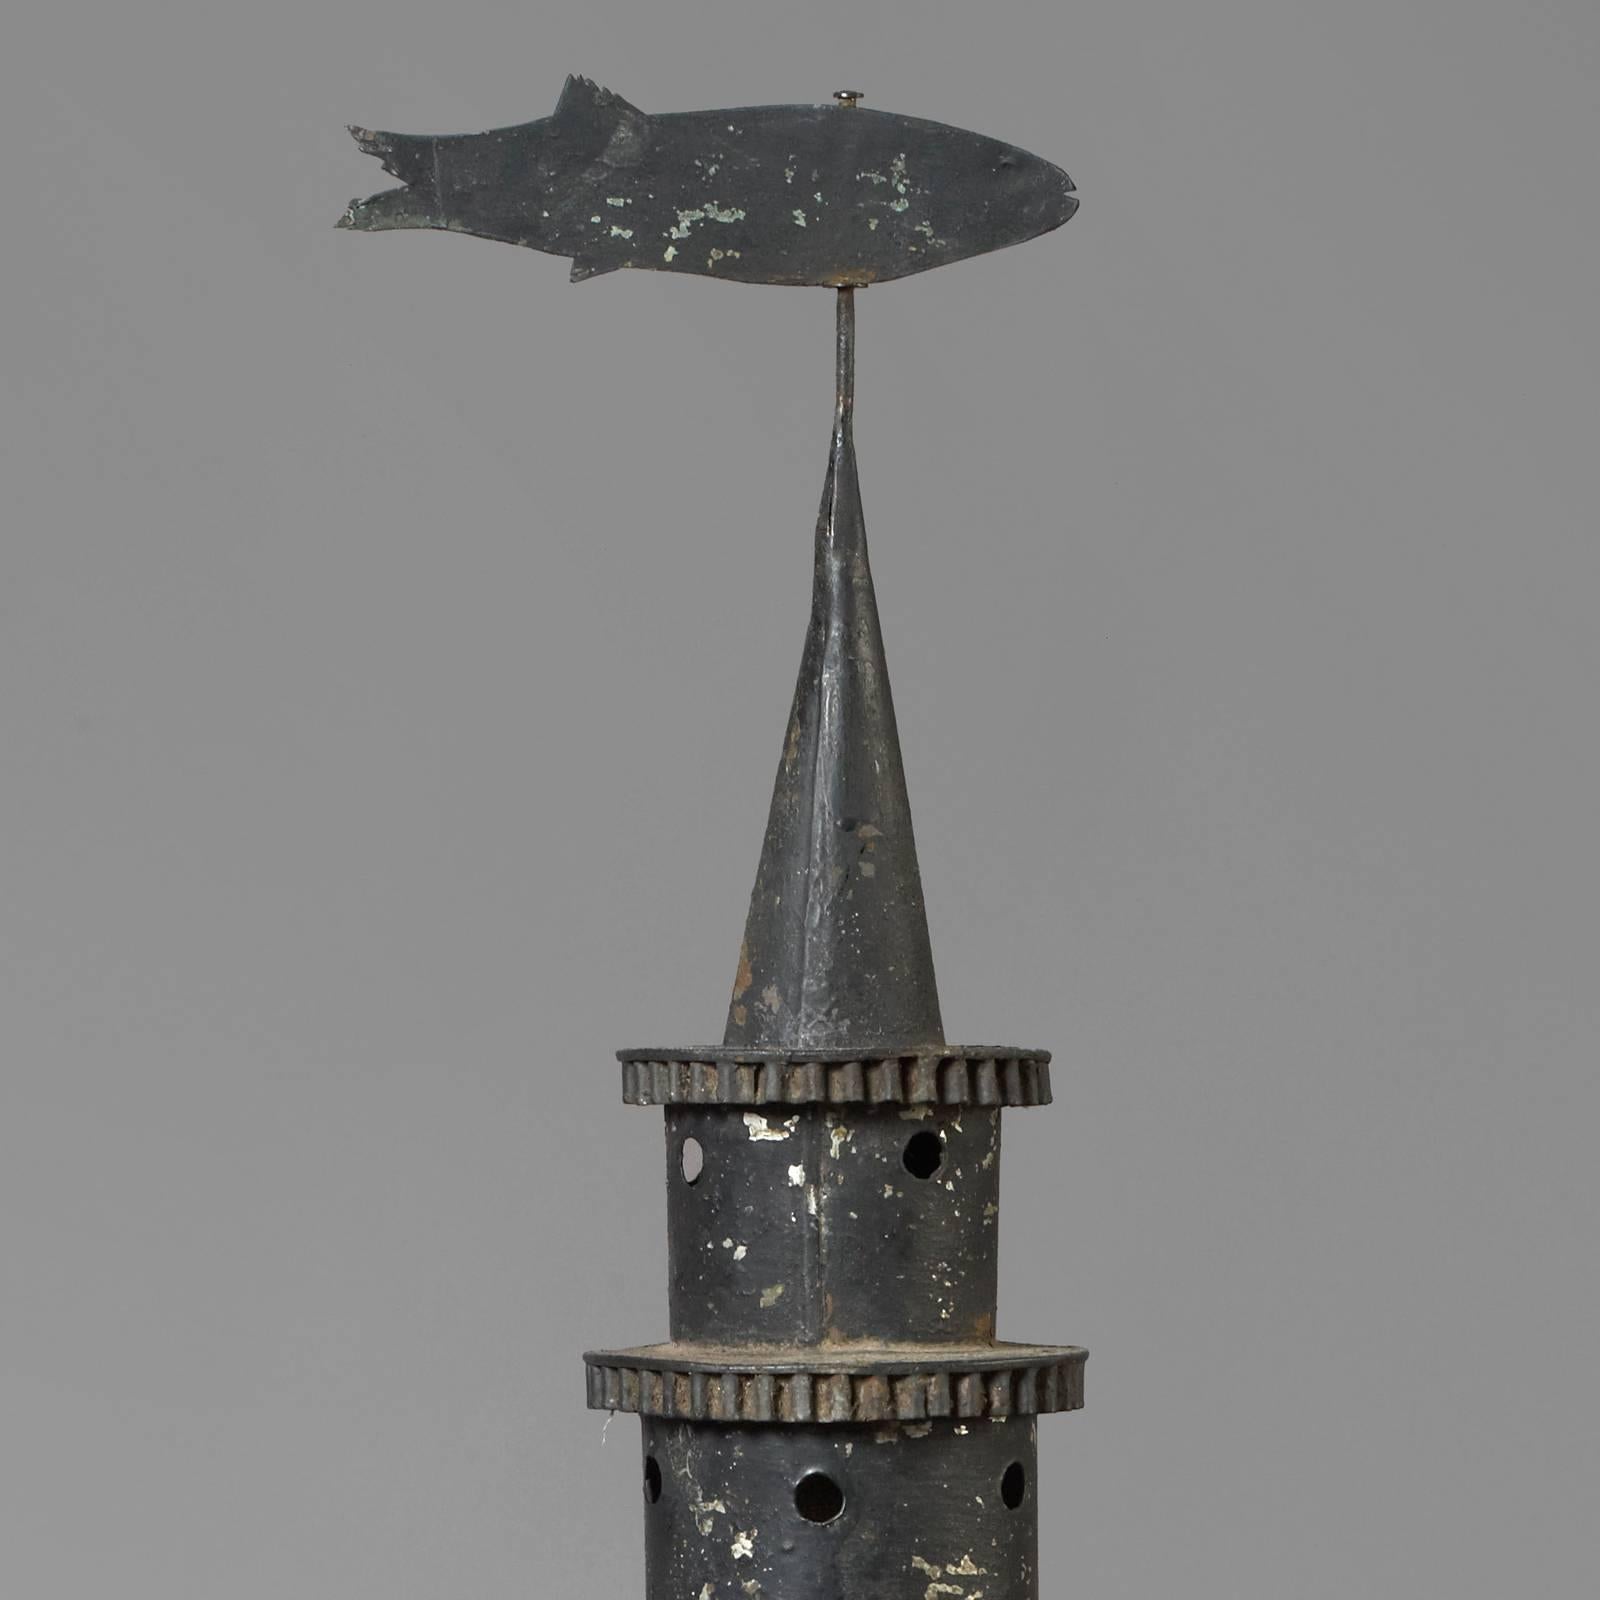 New England, circa 1860-1875.
Iron, tin, glass lamp.
Condition: Fine condition, retaining traces of black paint, minor repairs and imperfections.
Found on cape cod, this rare and possibly unique lantern is adorned with a fish finial. The original